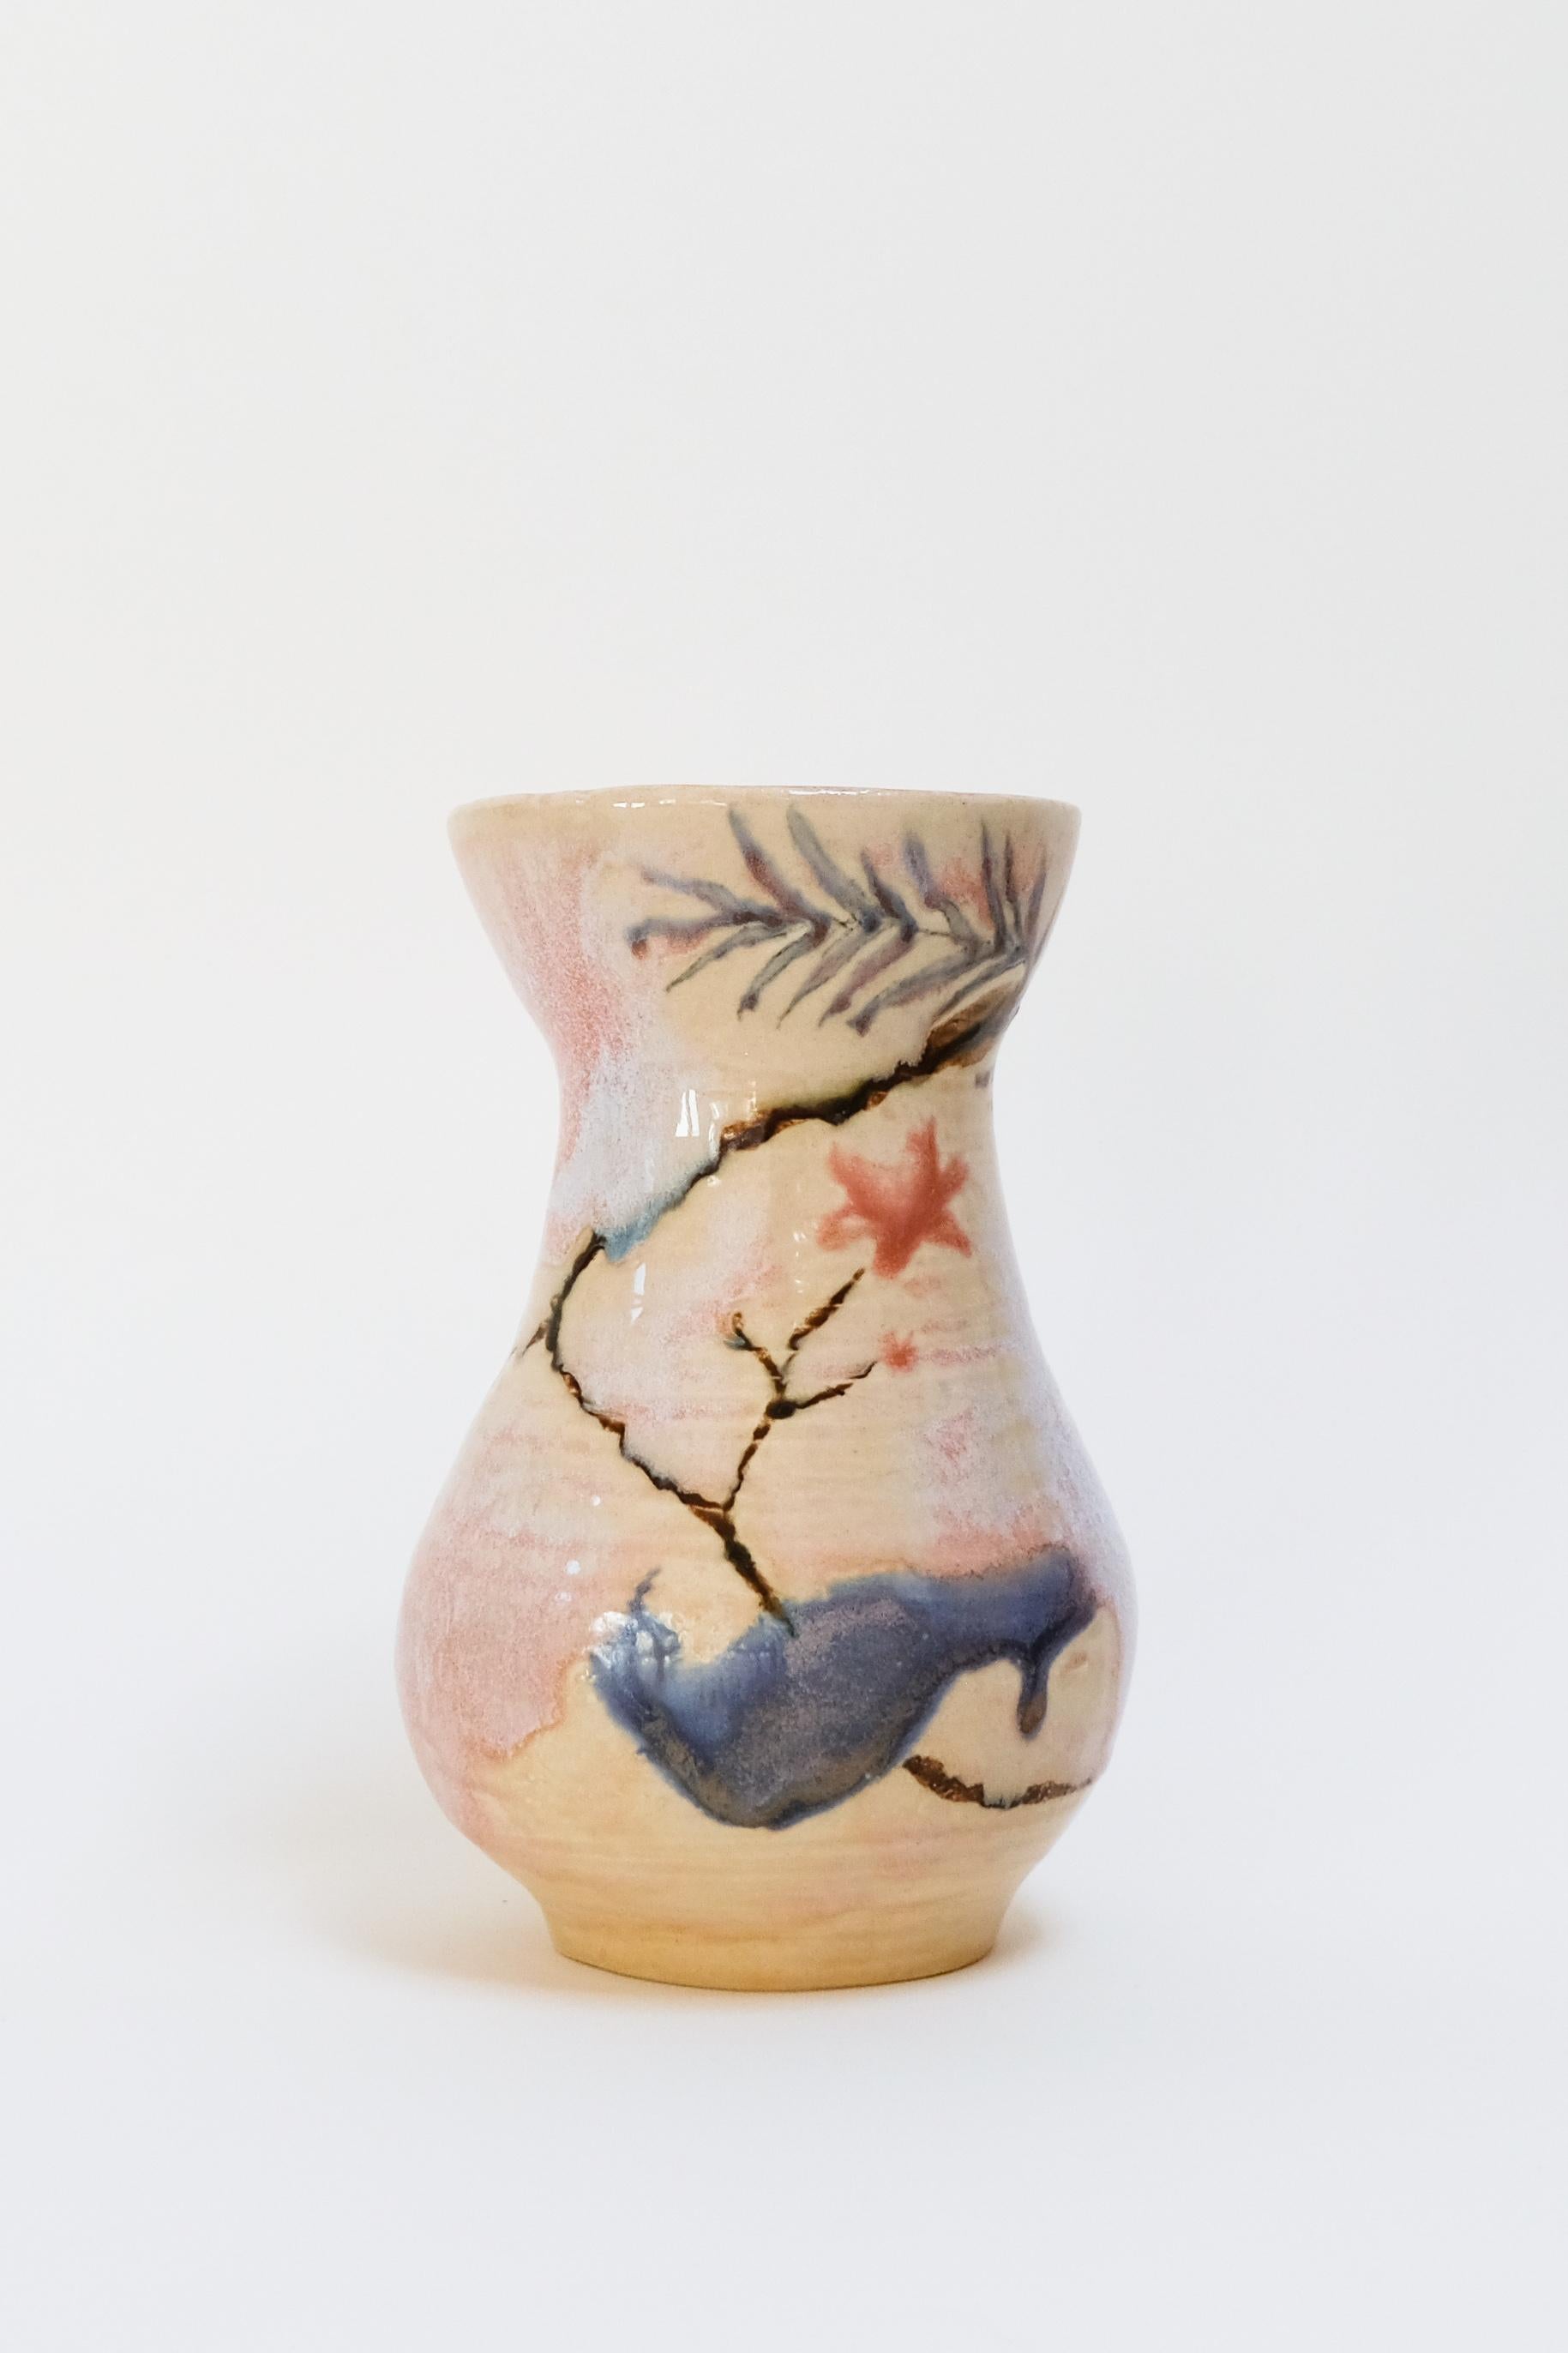 Autumn Blooms 2 - contemporary warm botanical abstract ceramic vase, functional - Sculpture by Misbah Ahmed